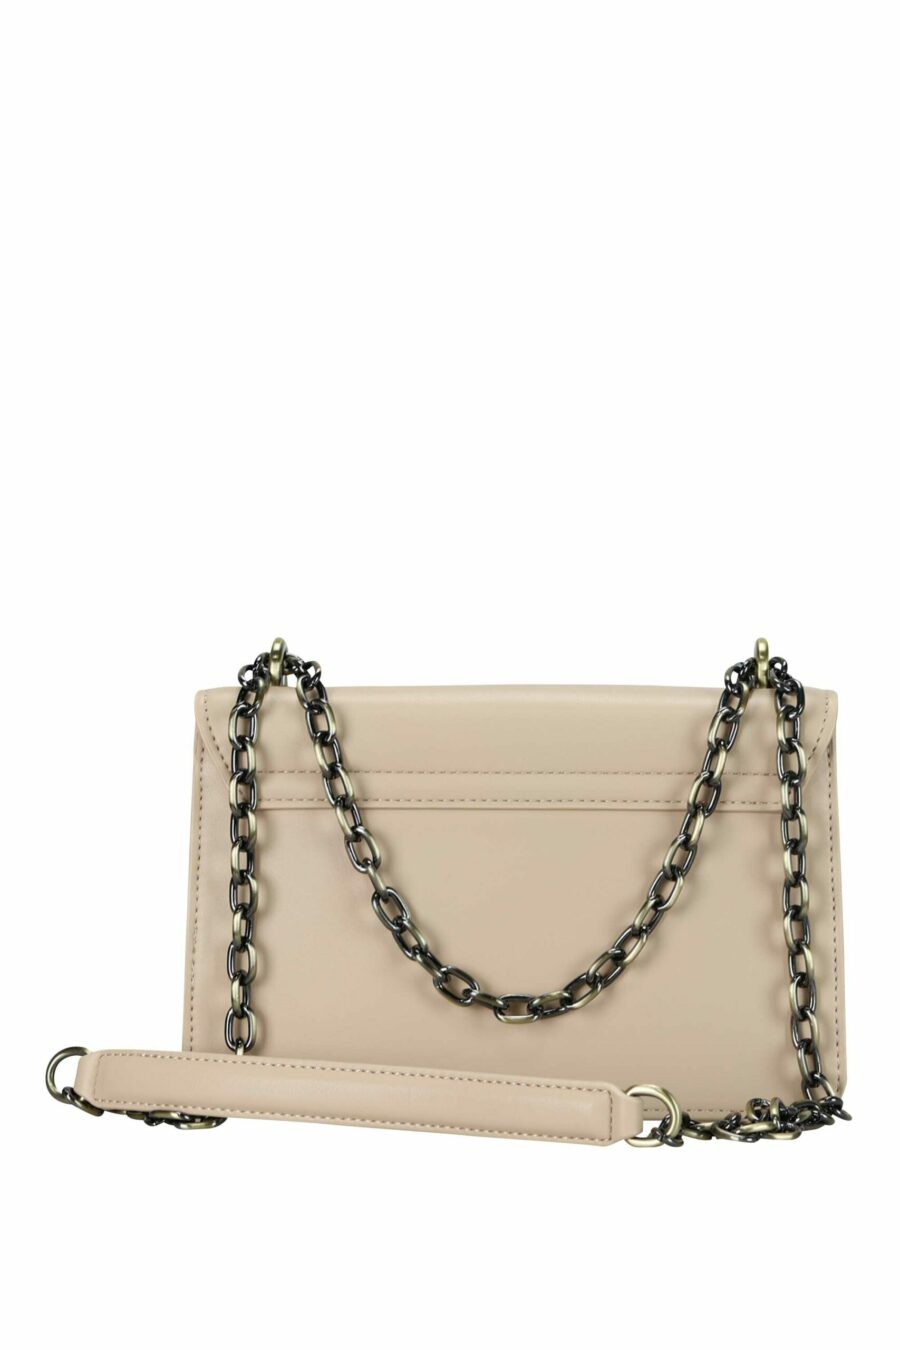 Square beige shoulder bag with chain and golden circular "c" logo - 8052672735591 2 scaled